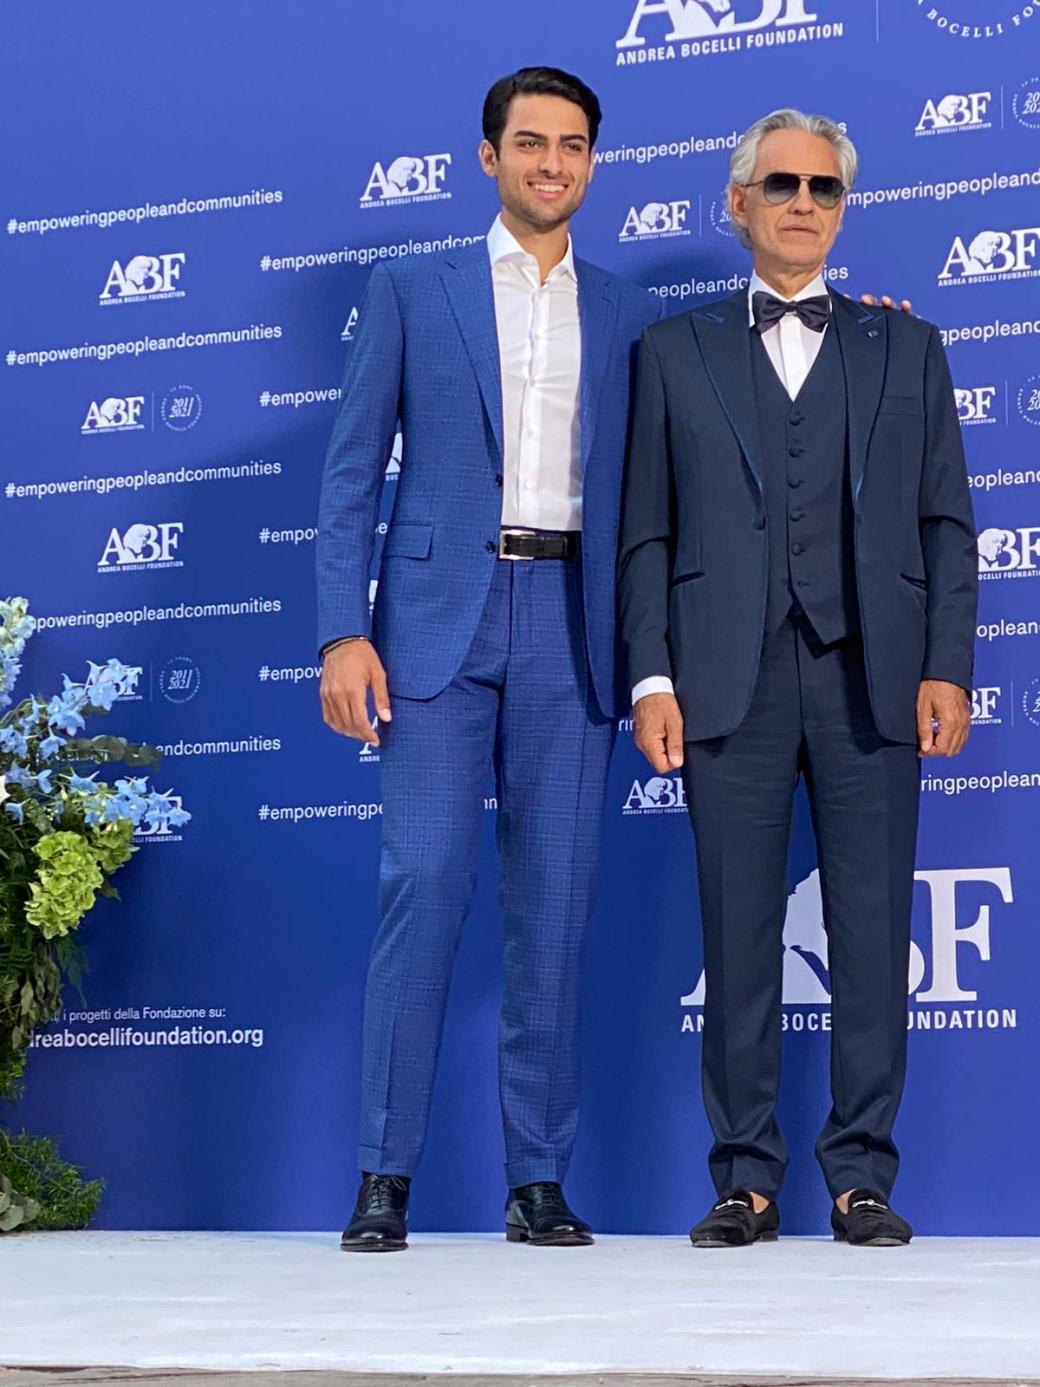 Andrea Bocelli - Amazing experience of elegance, walking the runway in  #StefanoRicci with my sons Amos and Matteo at Palazzo Pitti, in Florence.